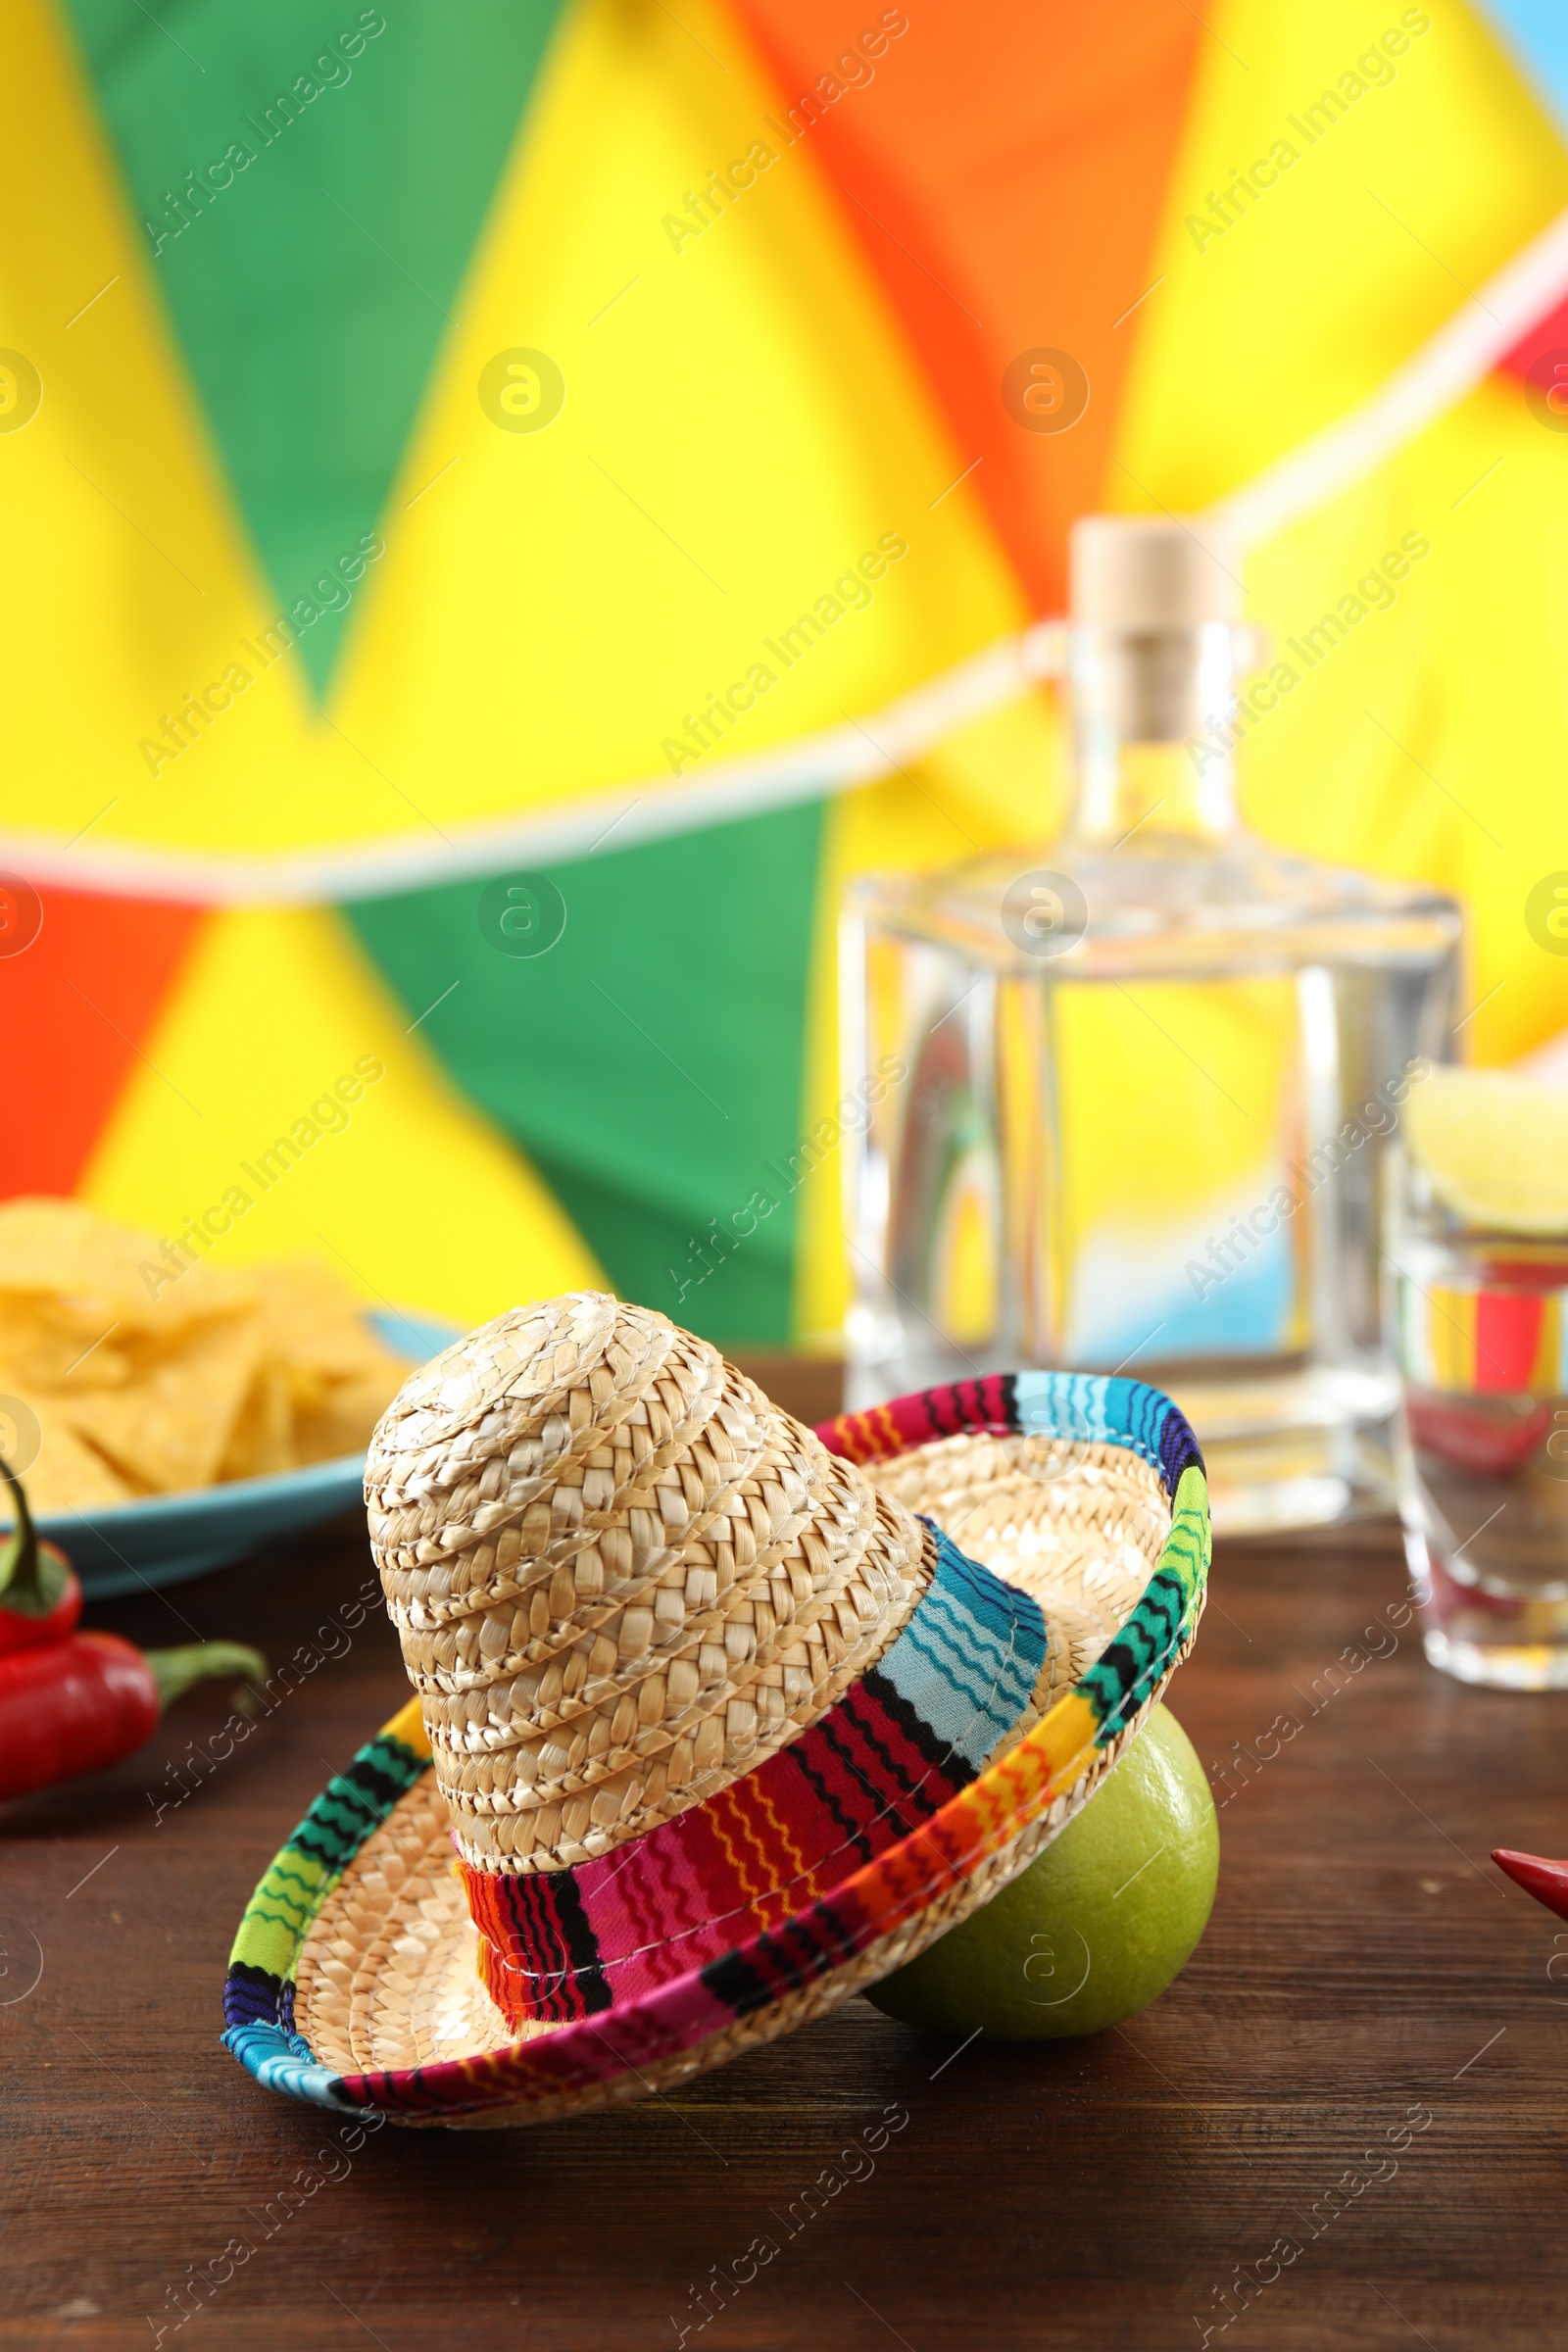 Photo of Mexican sombrero hat and lime on wooden table